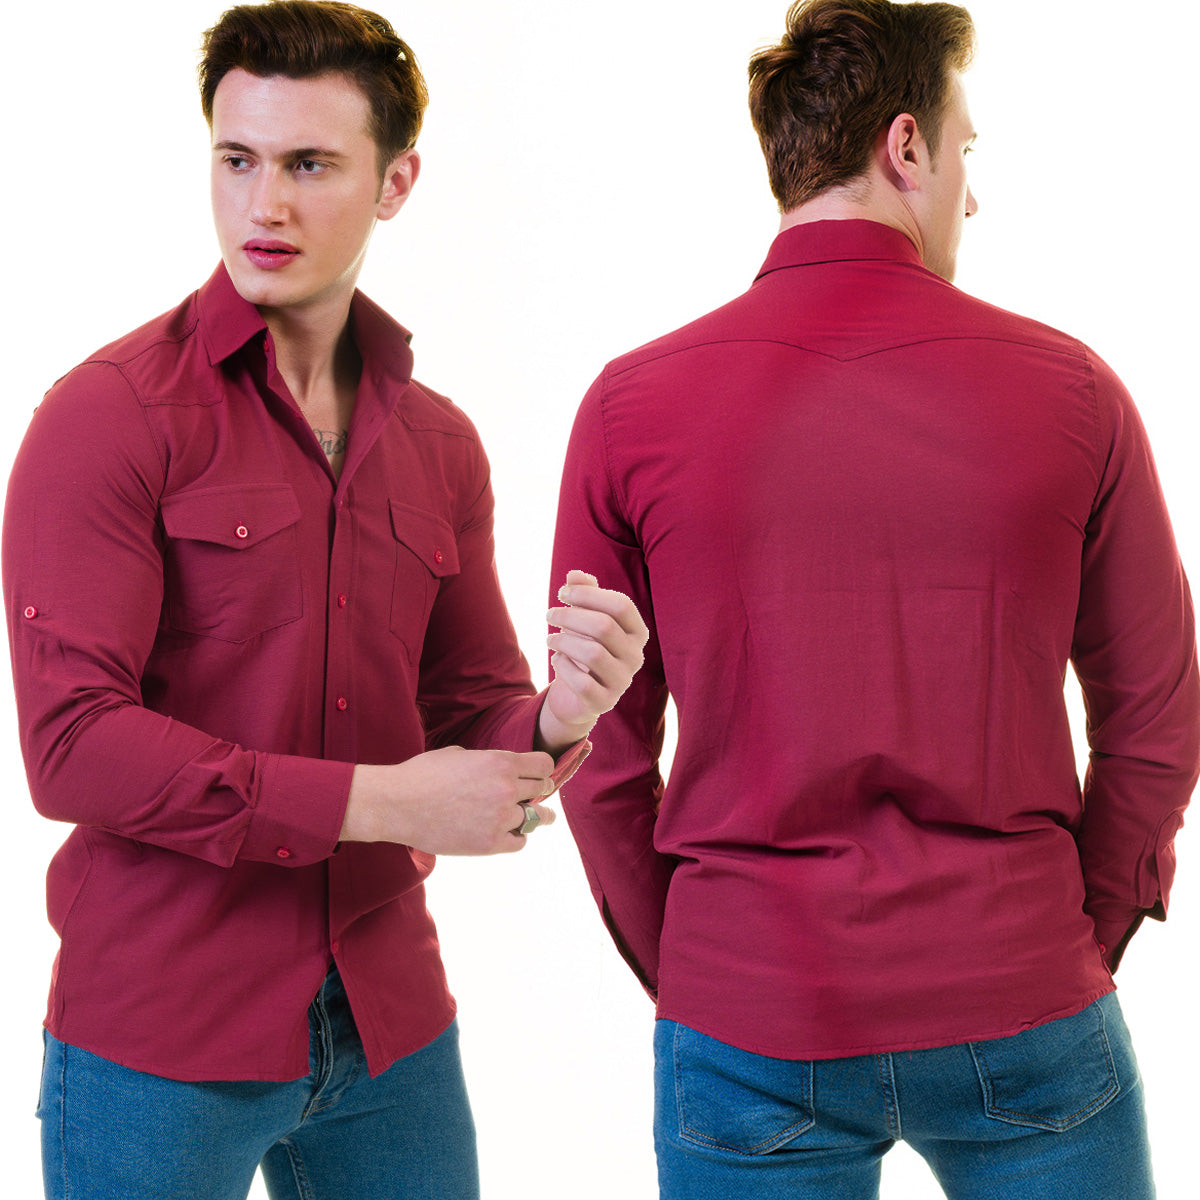 Dark Maroon Mens Slim Fit Designer Dress Shirt - tailored Cotton Shirts for Work and Casual Wear